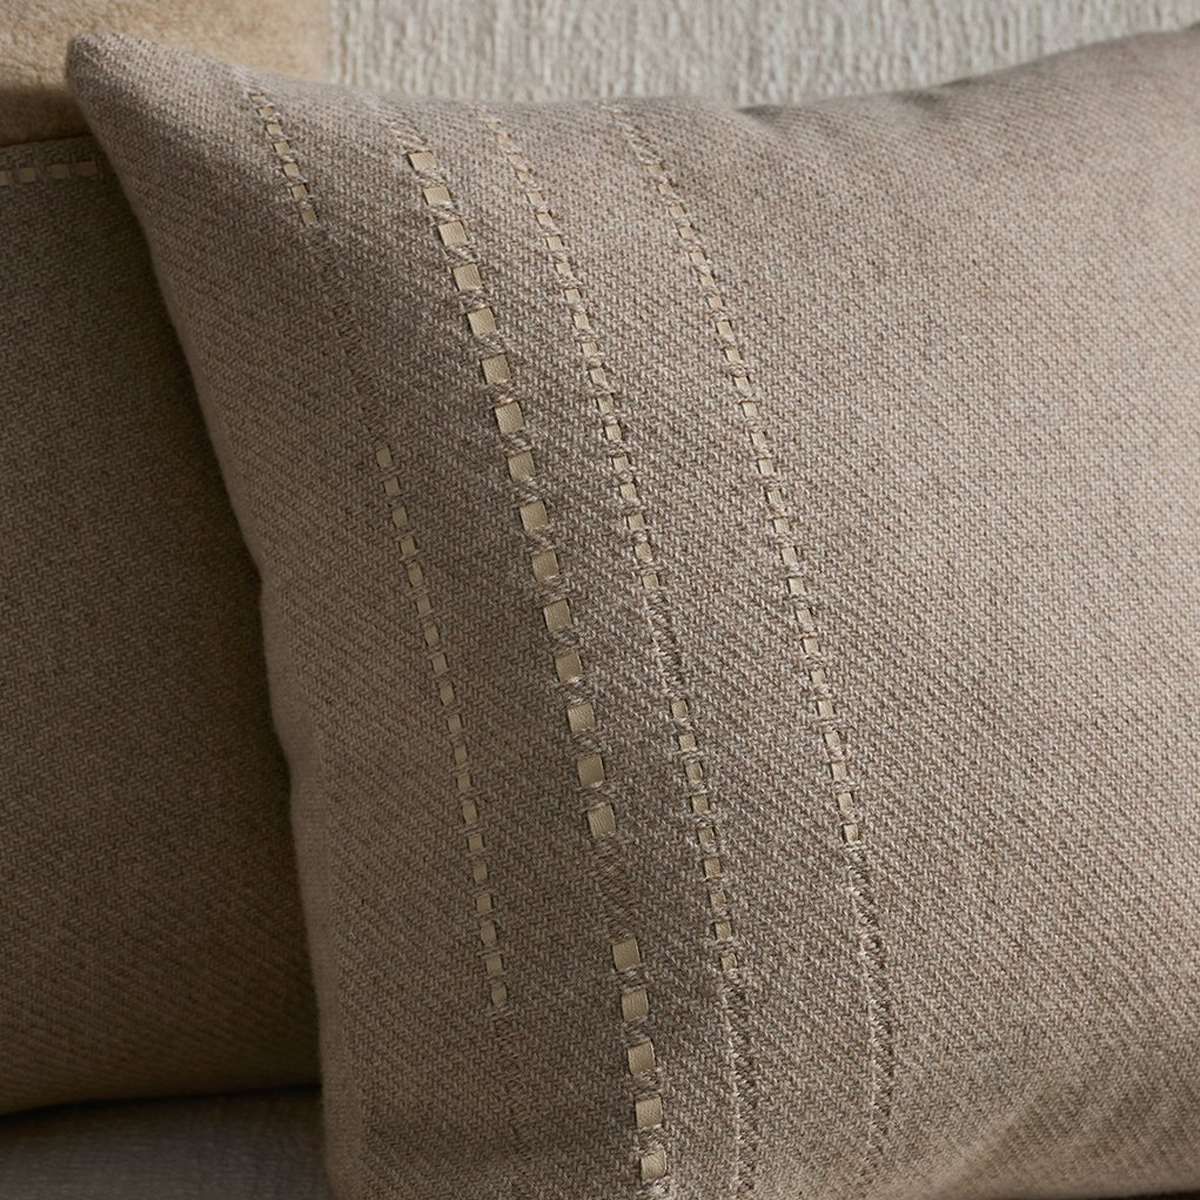 deLeCuona-Cashmere-Wool-Twill-Cushion-with-vertical-detail-Taupe-.jpg